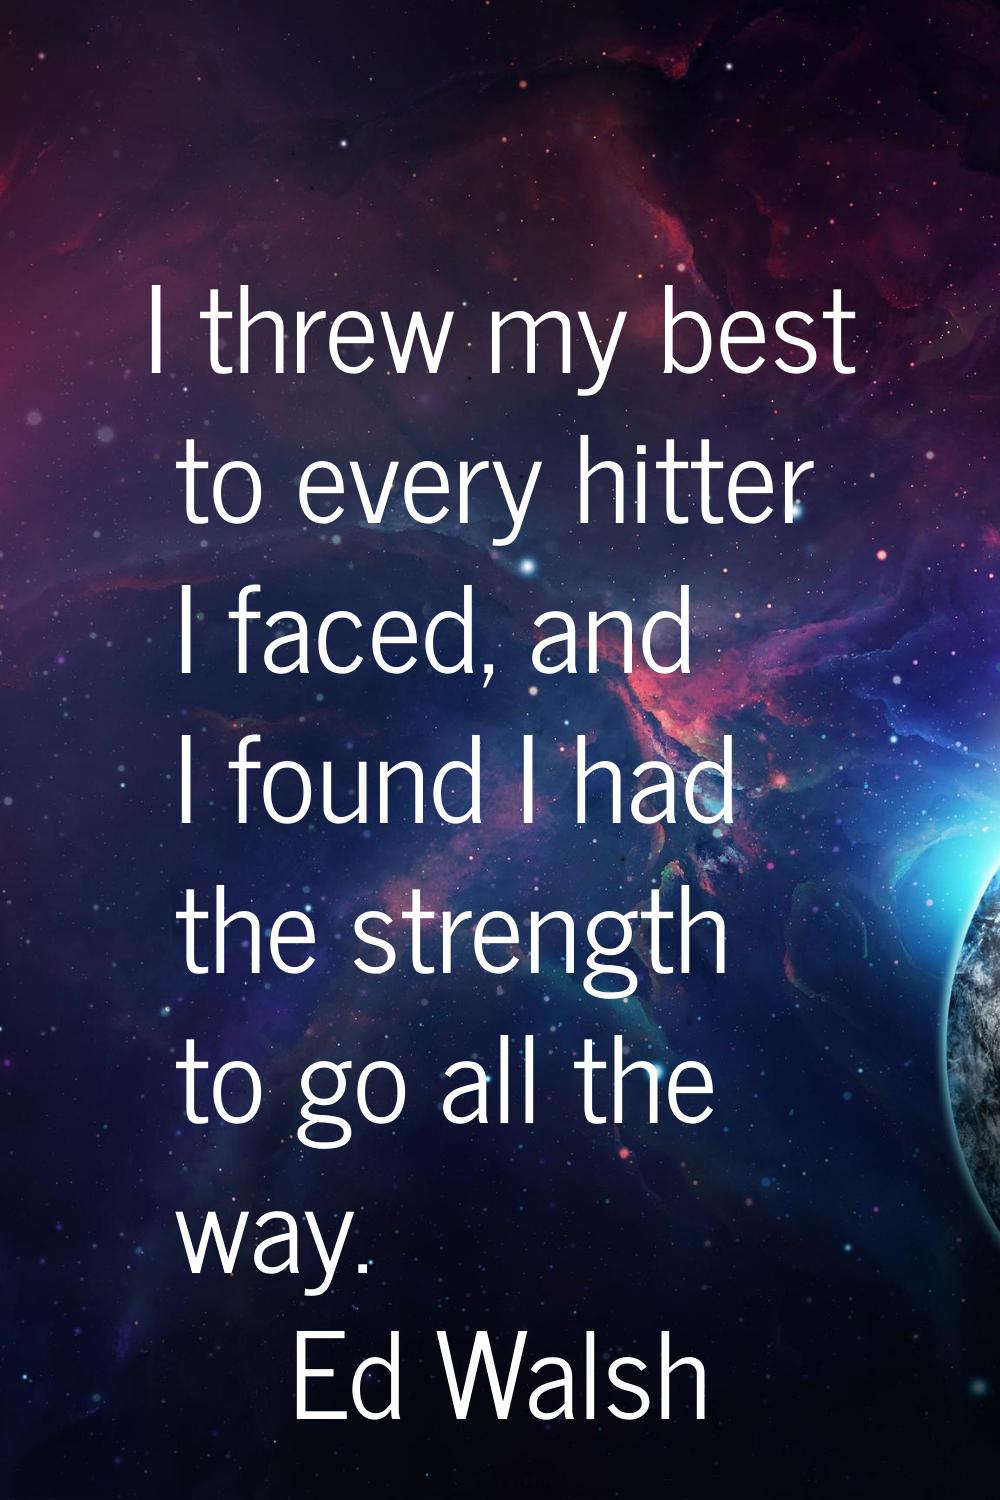 I threw my best to every hitter I faced, and I found I had the strength to go all the way.